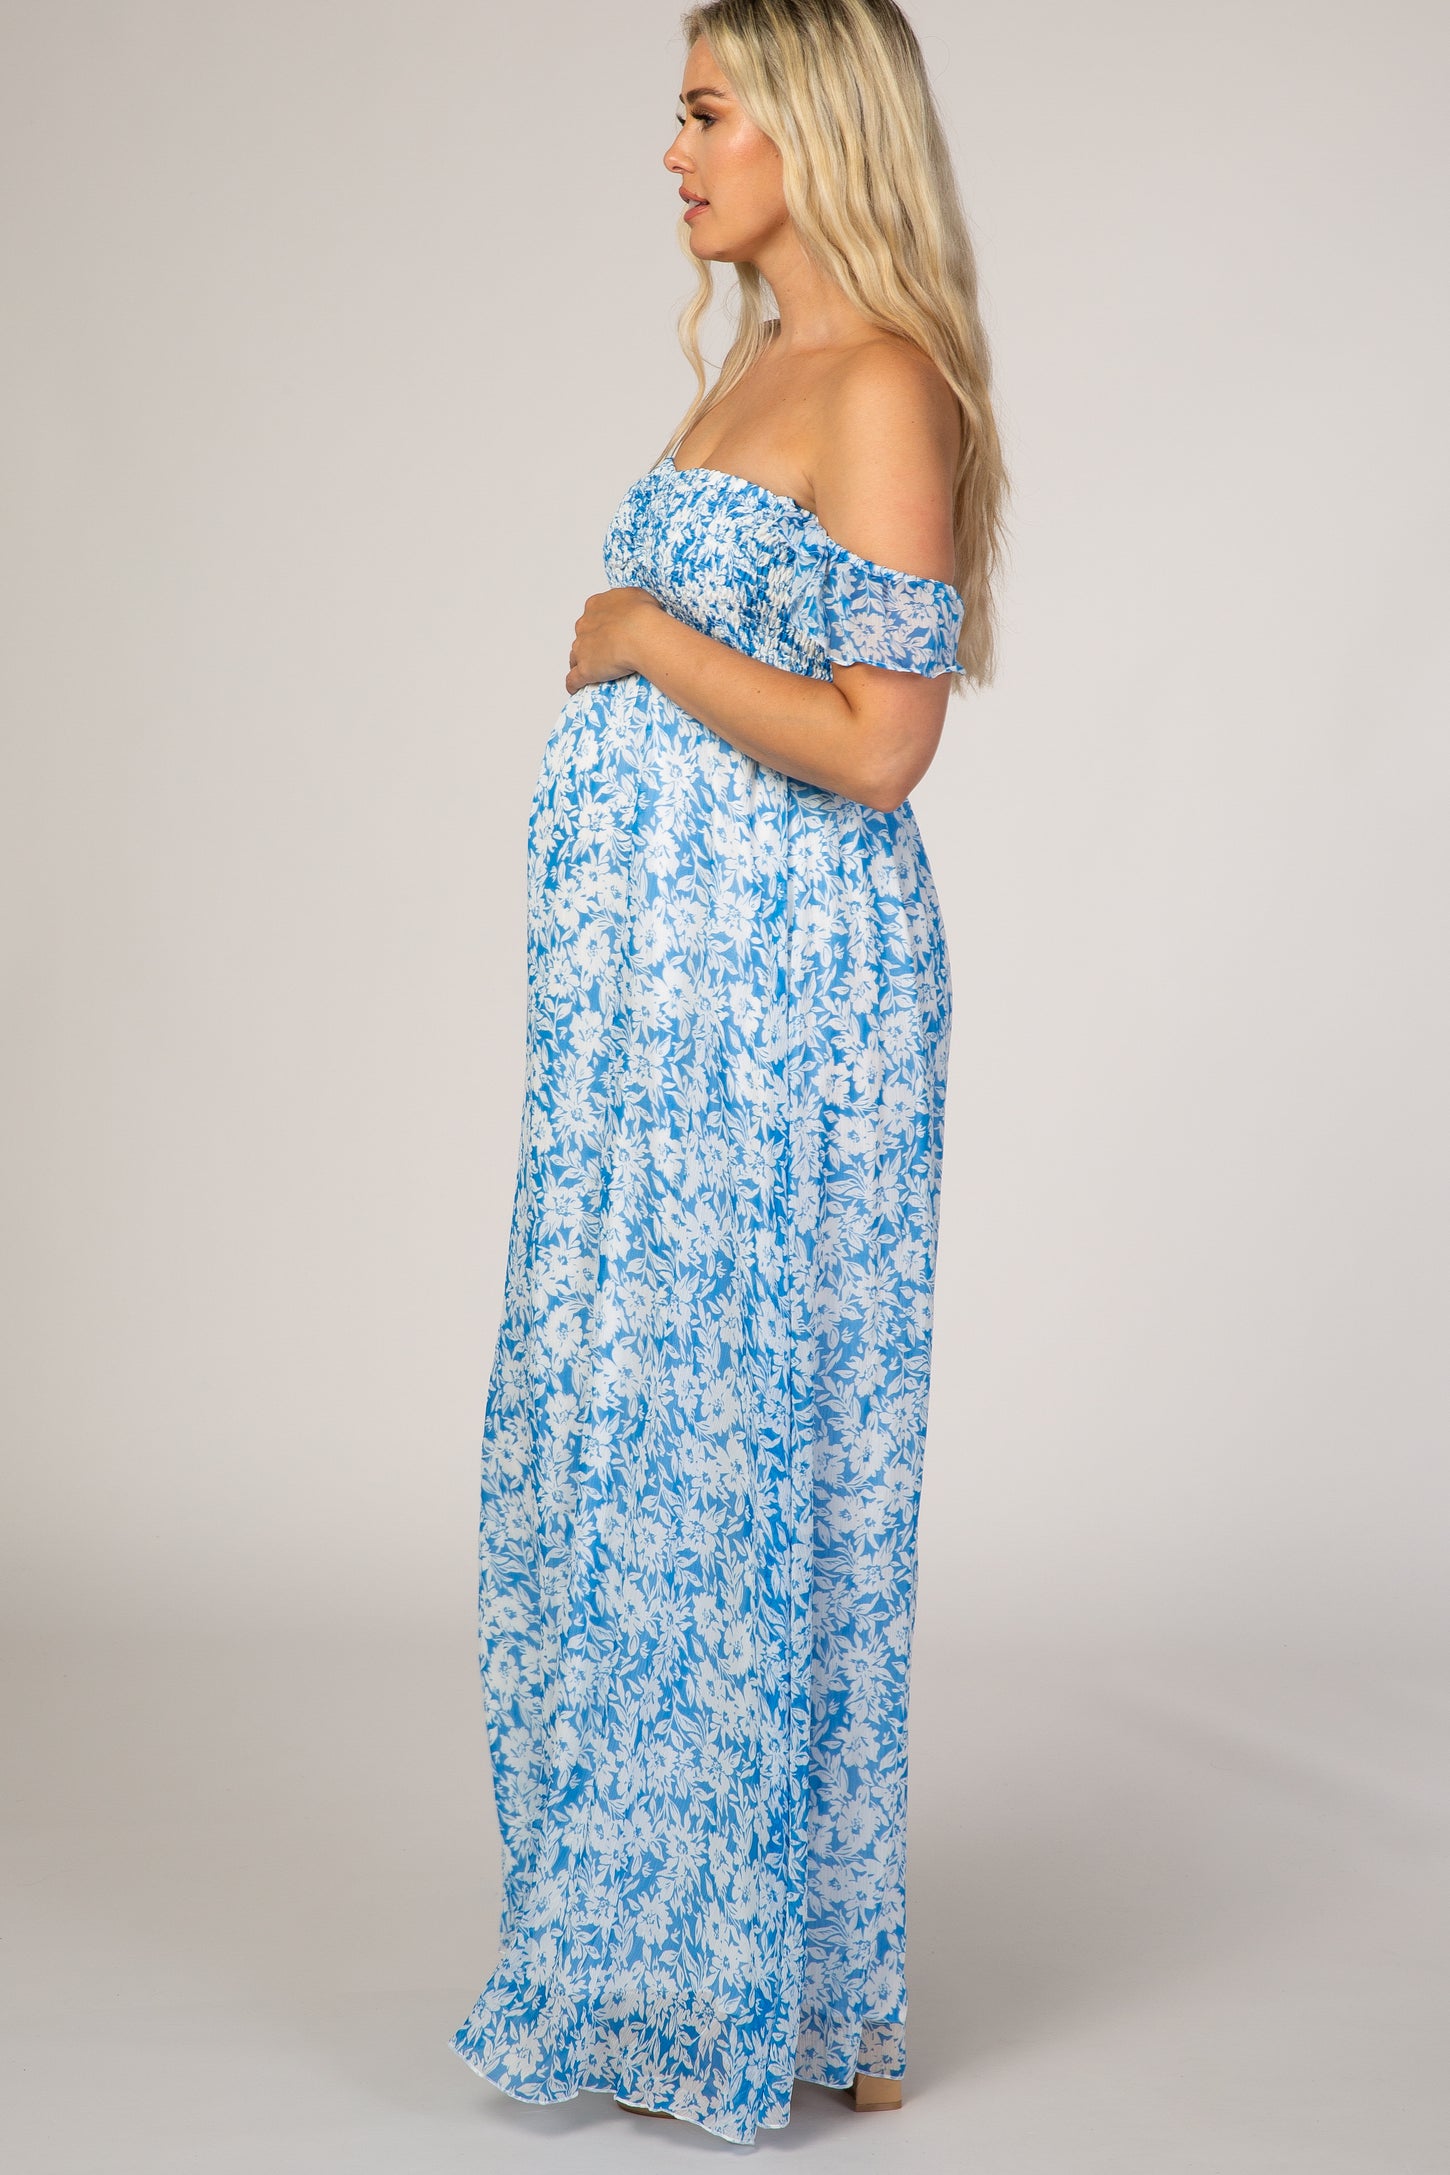 Blue Floral Maxi Dress With Cut Outs And Slit